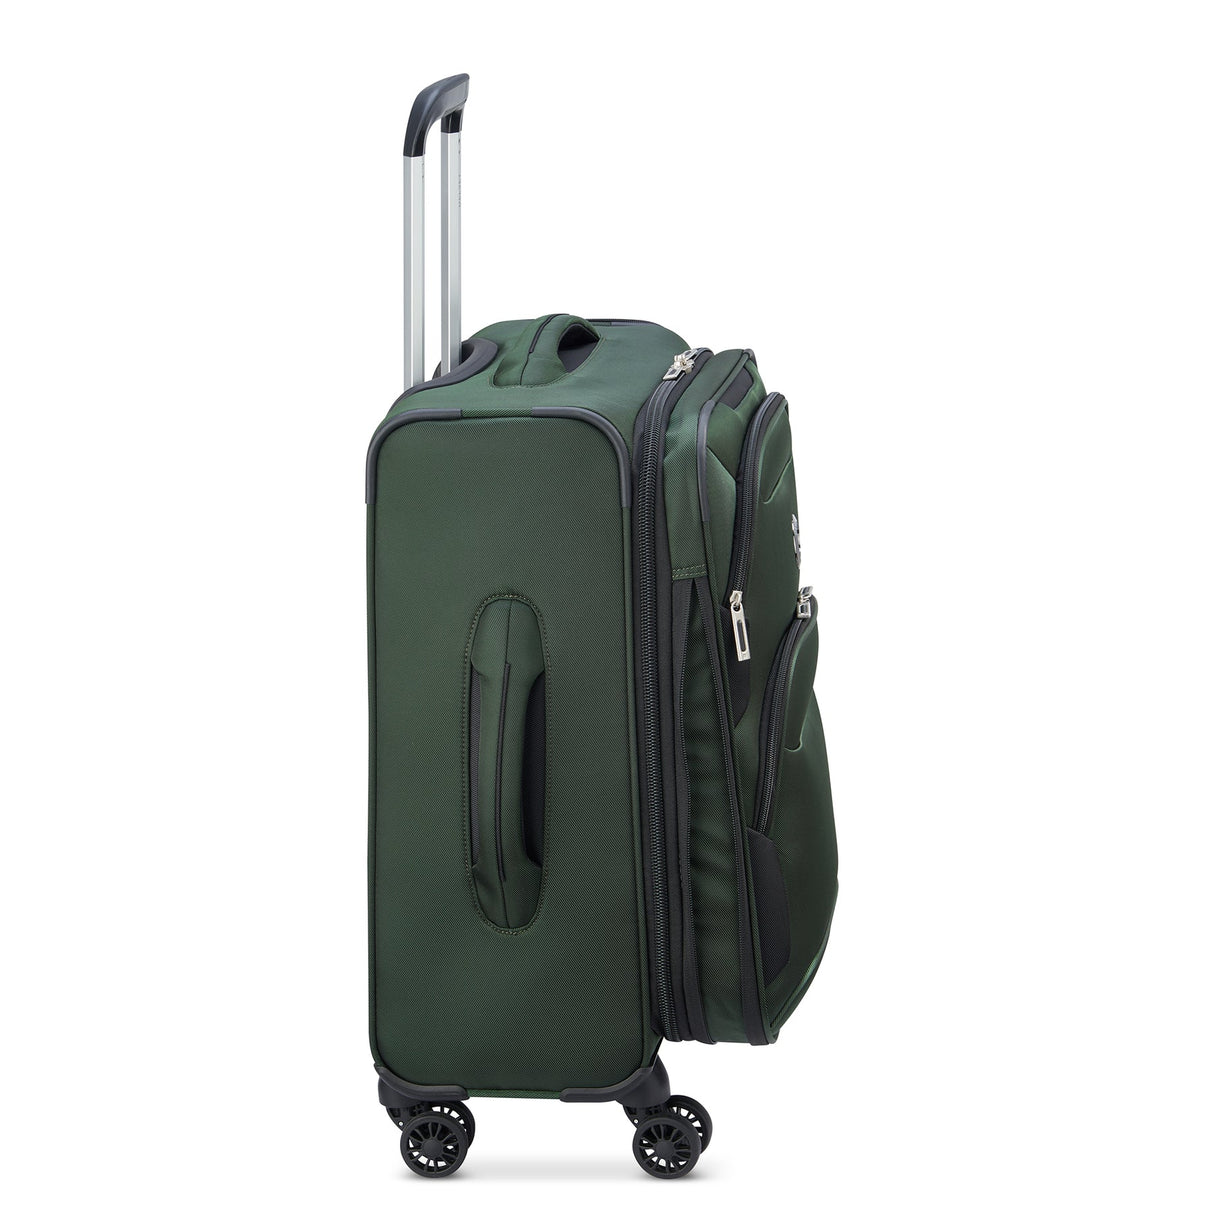 Delsey Sky Max 2.0 Carry-On Expandable Spinner , , delsey-sky-max-2.0-40328480503-12_1800x1800_d0142405-fb0d-4220-93f6-058a53016e6b